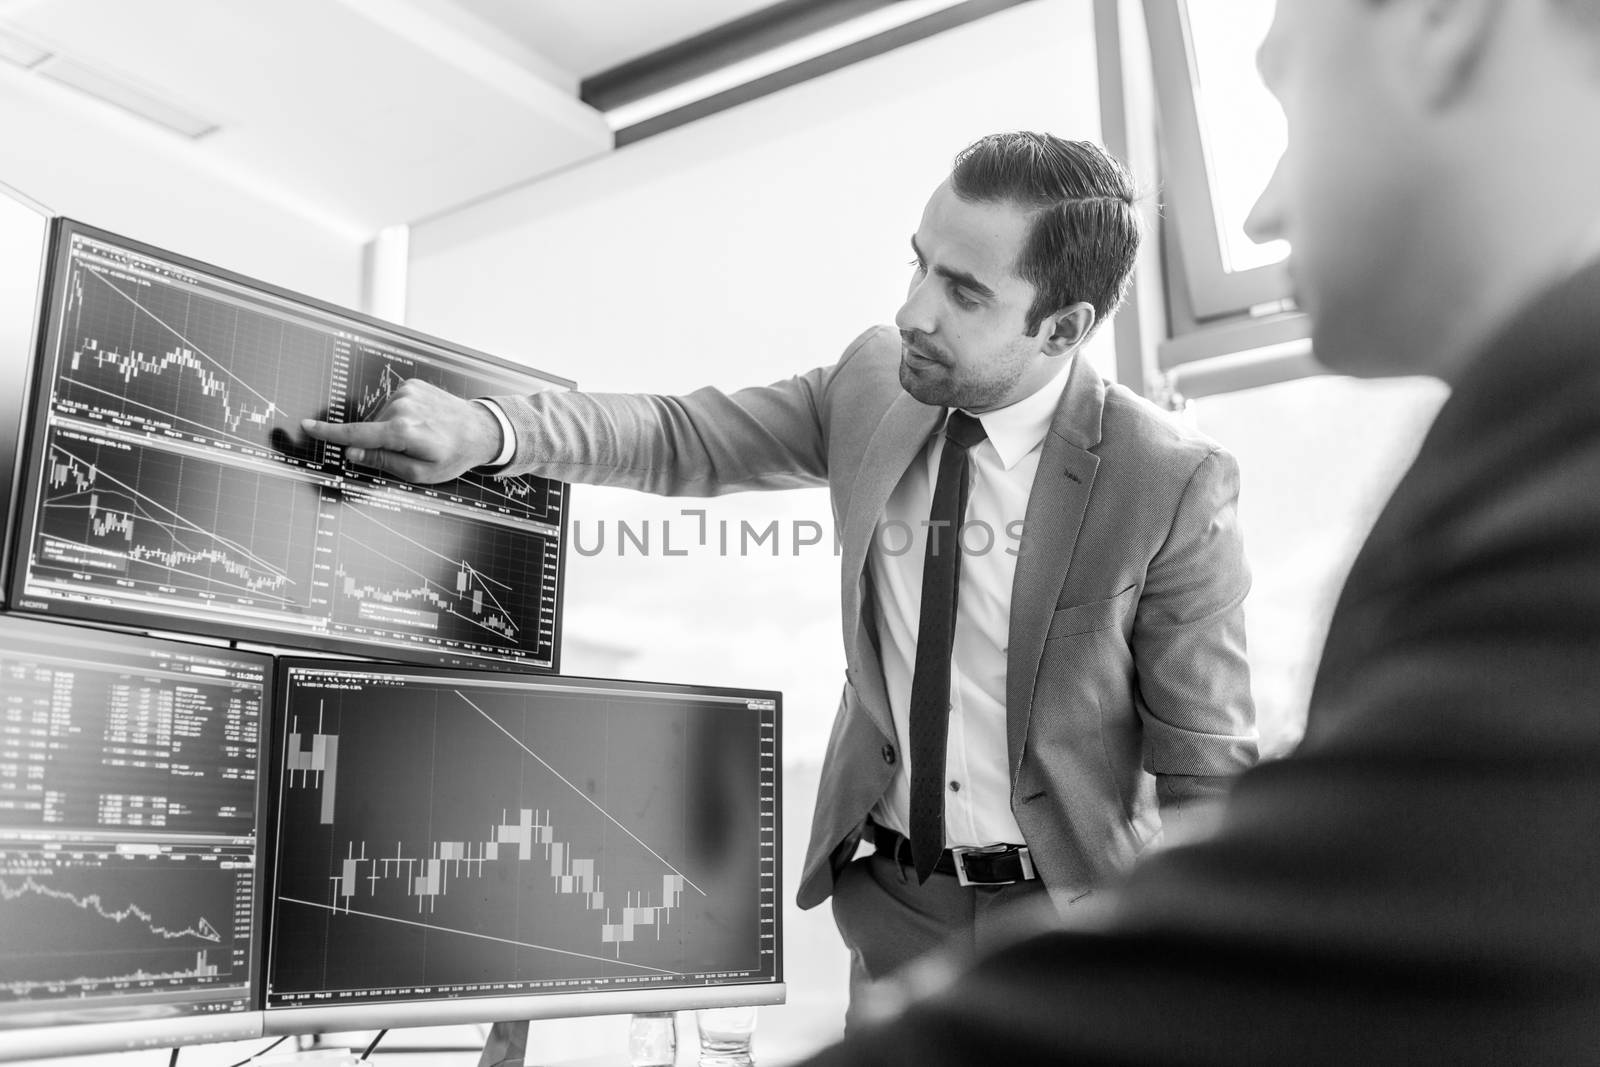 Businessmen trading stocks online. Stock brokers looking at graphs, indexes and numbers on multiple computer screens. Colleagues in discussion in traders office. Black and white image.